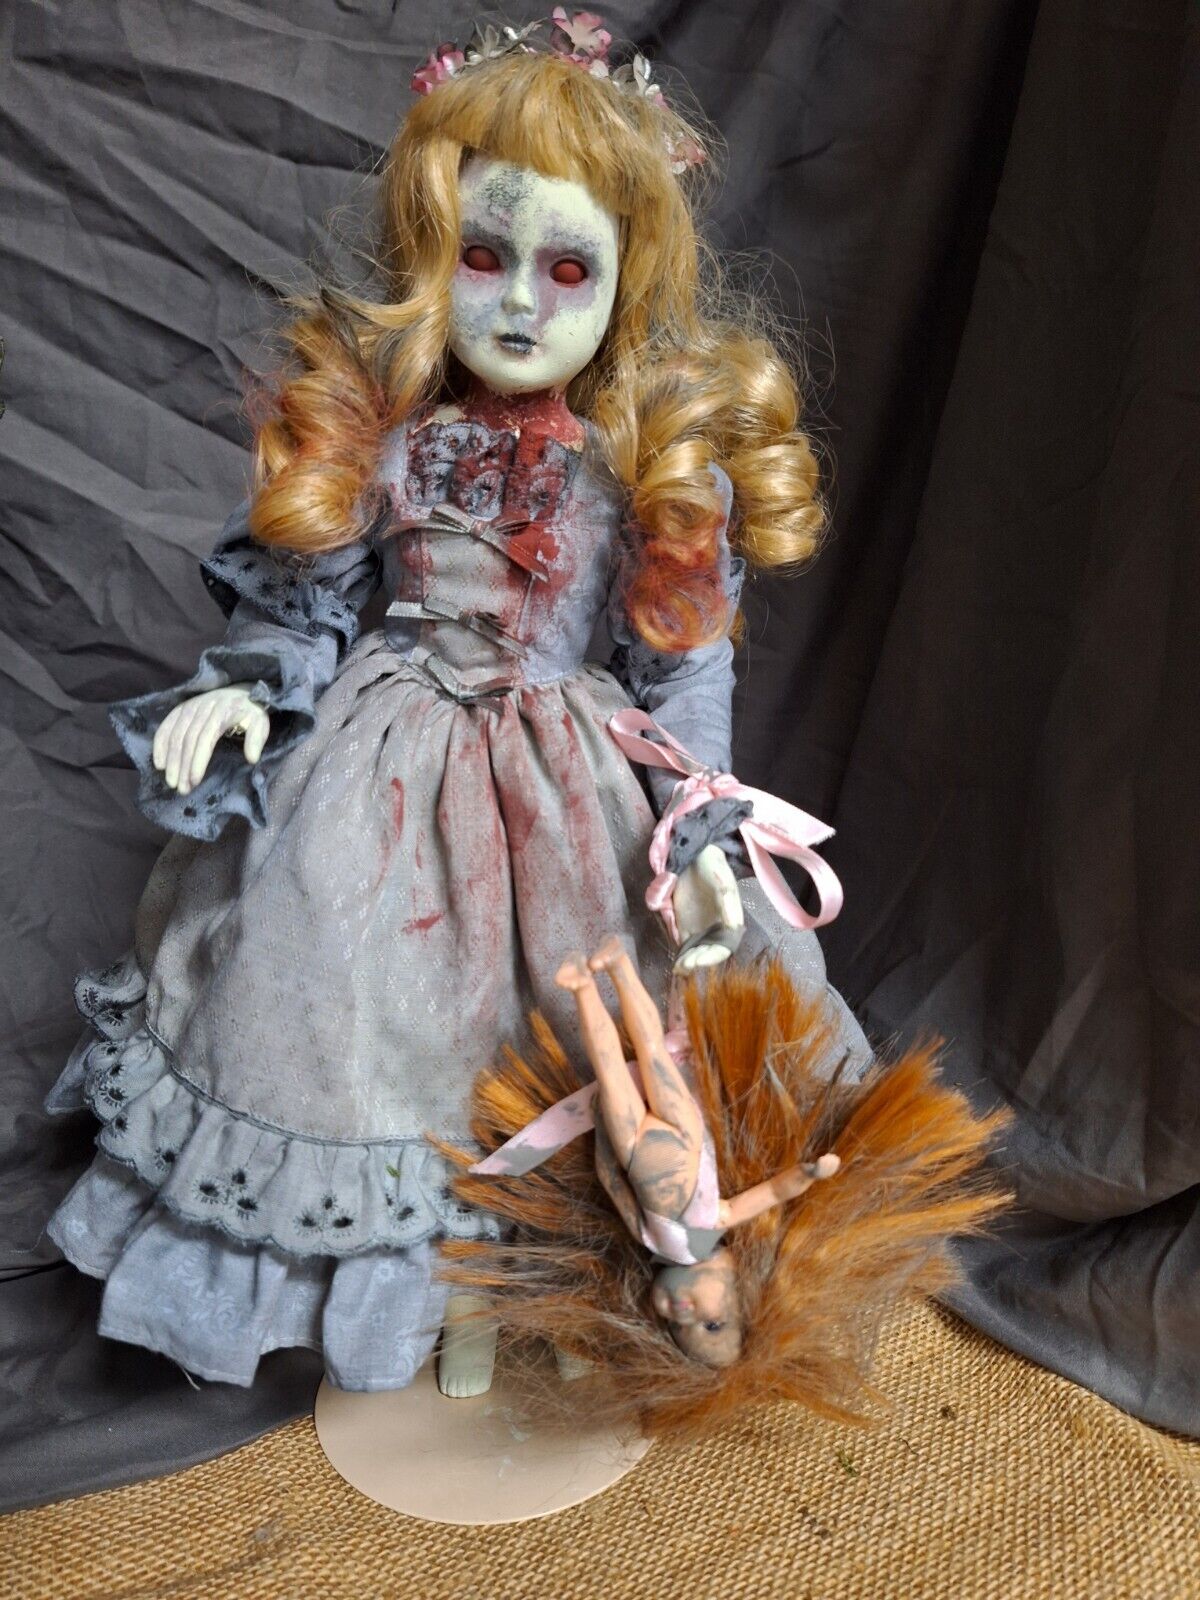 OOAK Doll With Her Doll, 15 In Tall, Handpainted, Halloween Prop, W/stand